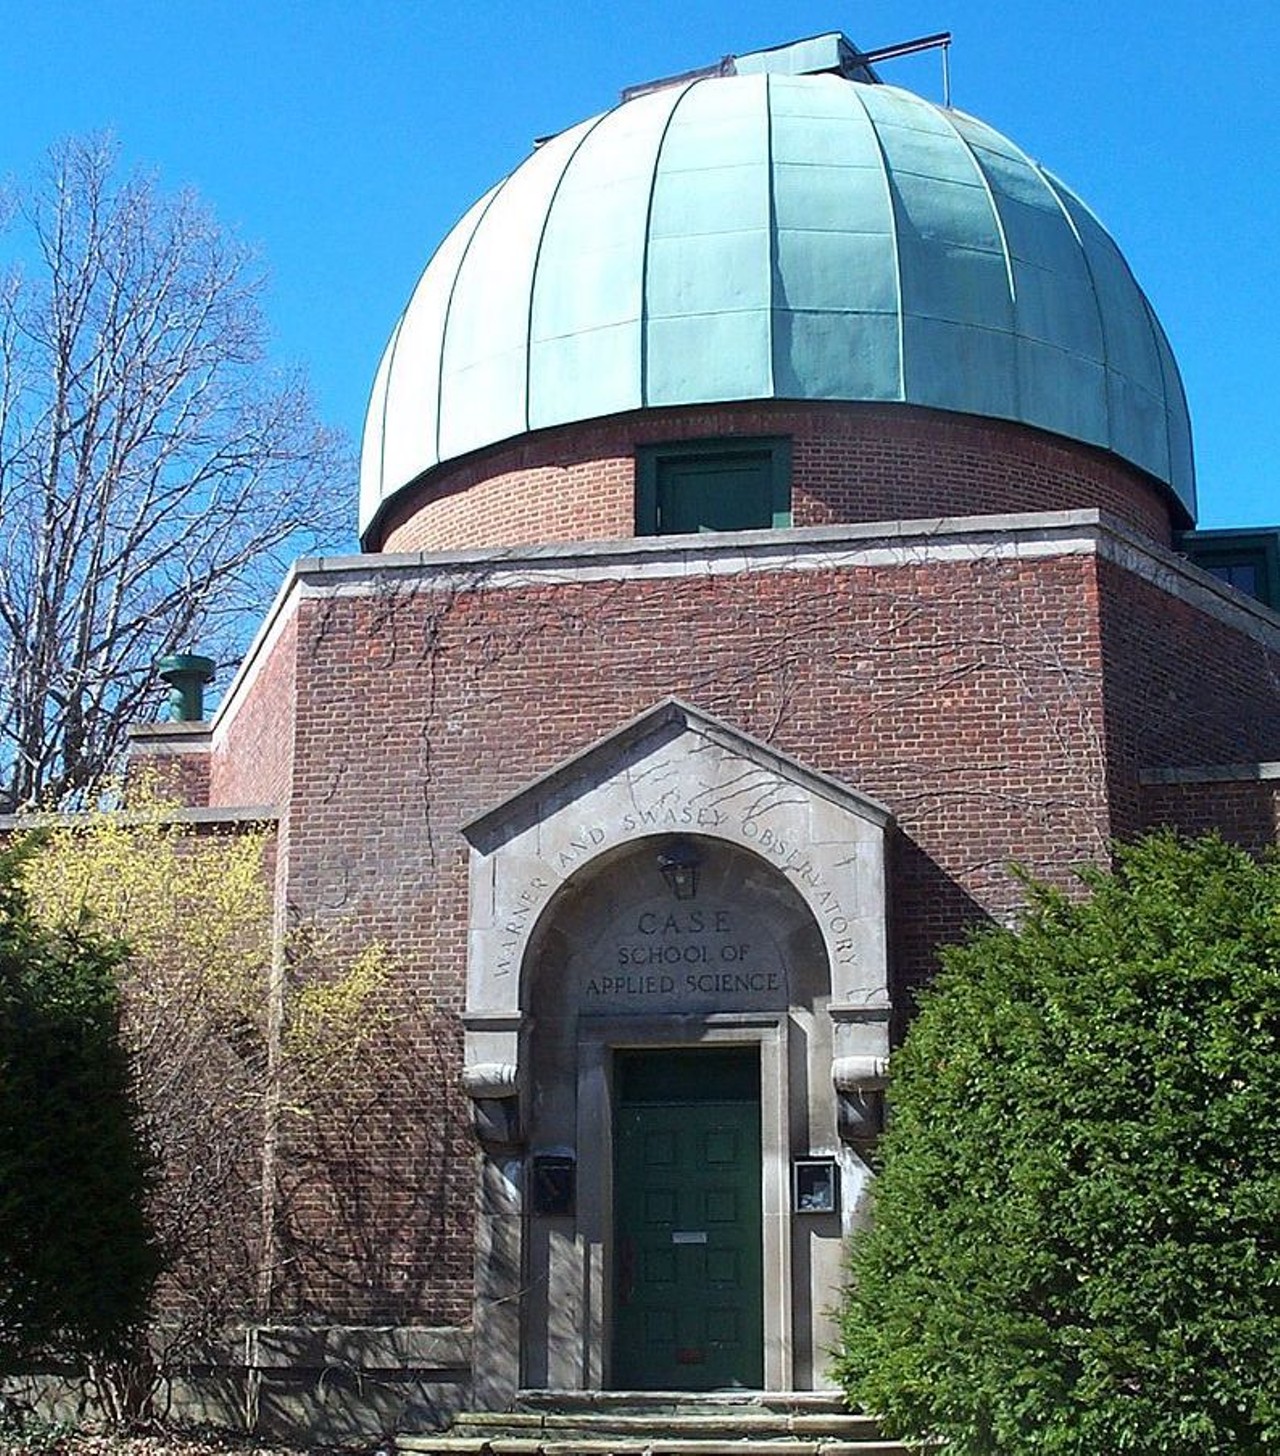  The Warner and Swasey Observatory
11000 Euclid Ave., Cleveland
Originally located on North Taylor in East Cleveland, the Warner and Swasey Observatory was built in 1919 and was once a scientific landmark. Due to rising light pollution of the city, the observatory was shut down in 1980 and moved from its original location to the Case Western Campus where the telescope is today.
Photo via Stu_Spivack/Flickr